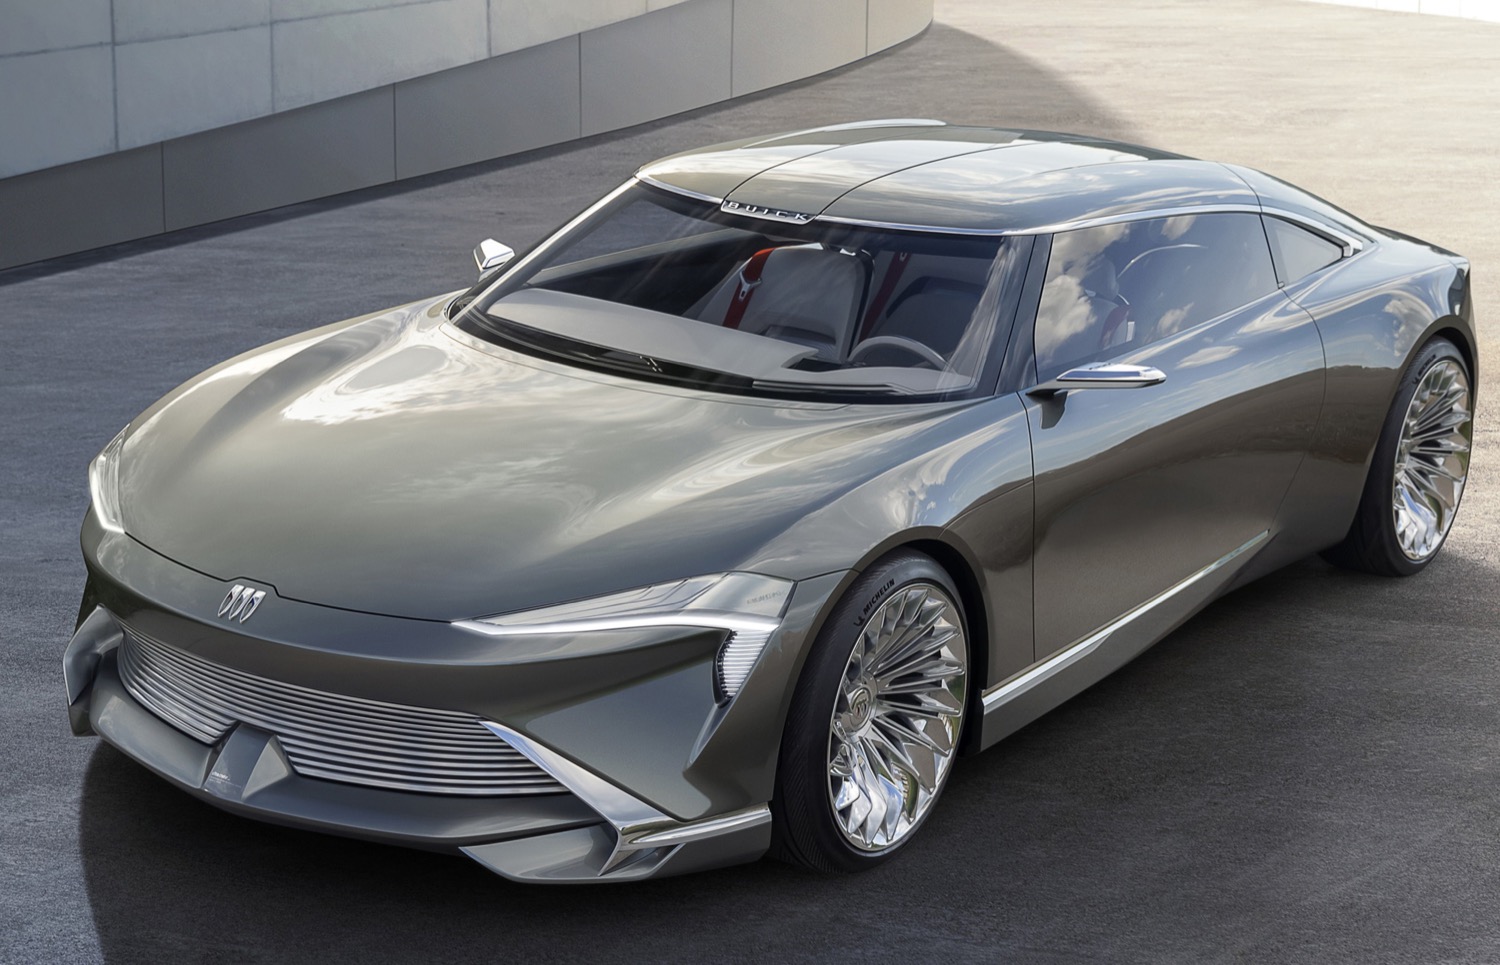 First Buick Electric Vehicle In 2024, Full EV Lineup By 2030